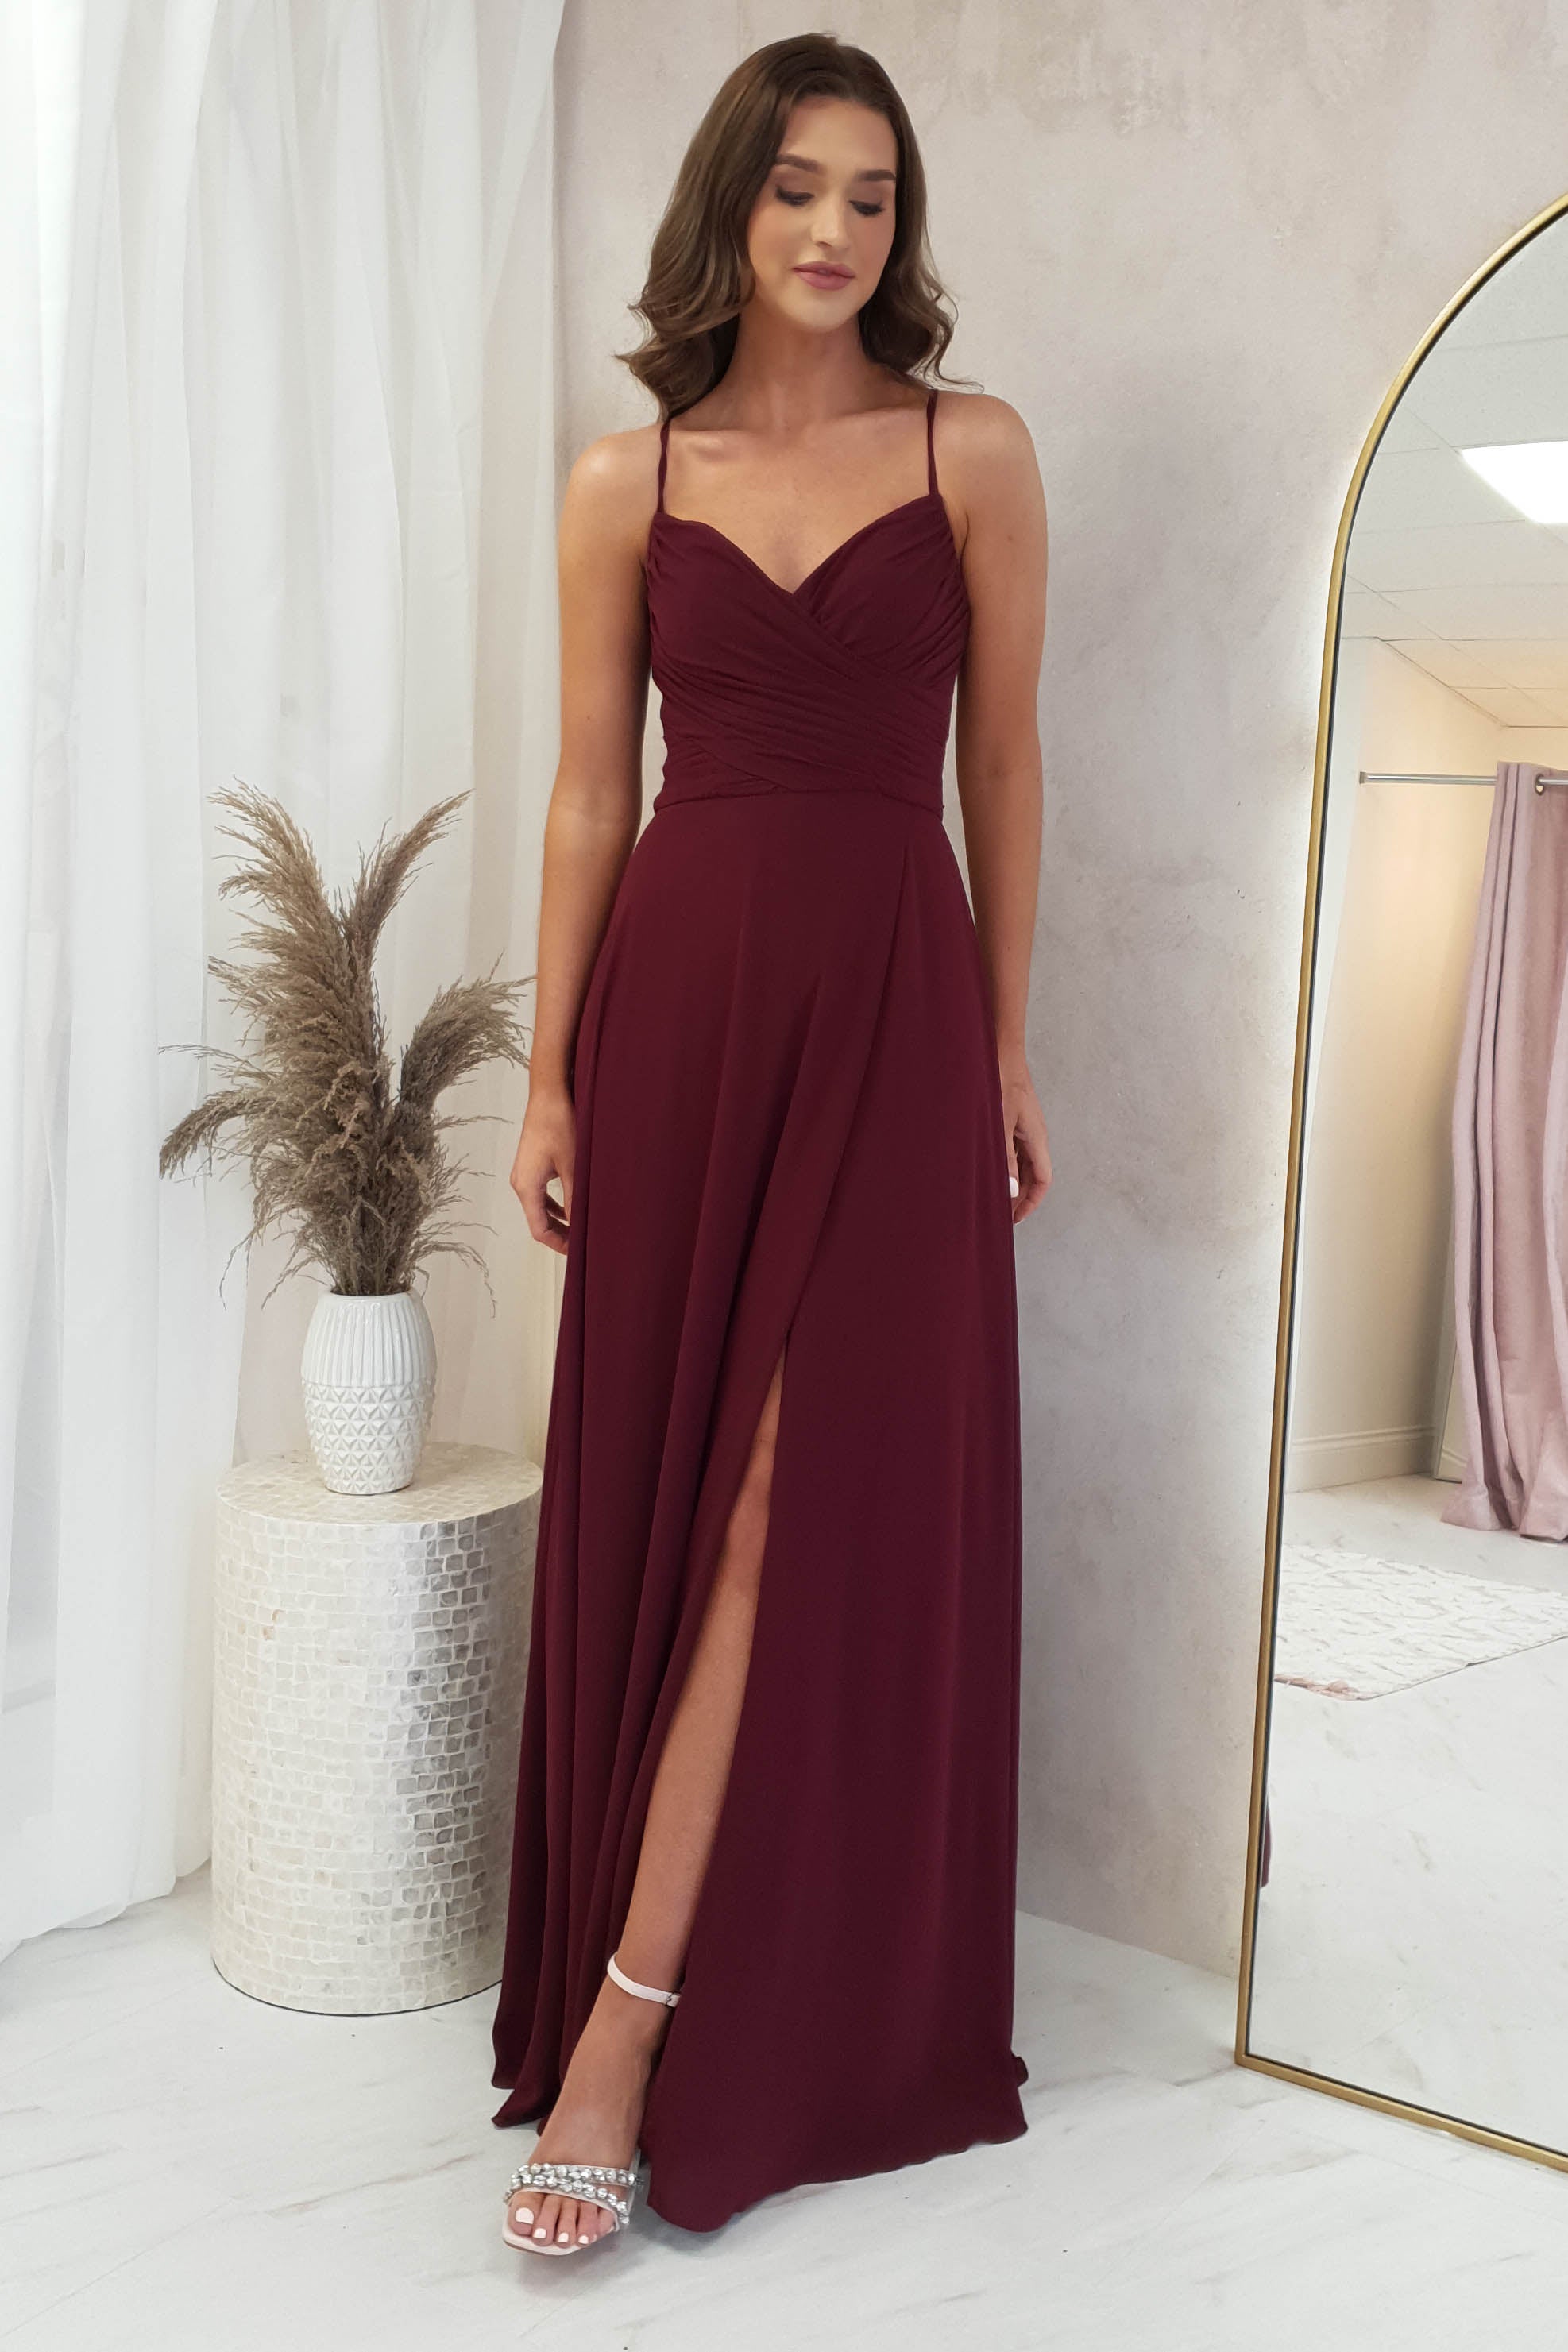 done-d6089-gown-with-slit-and-ruched-bust-wine-paris-fashion-rosie-silky-gown-forest-green-formal-debs-prom-dresses-dress-30874375323713.jpg